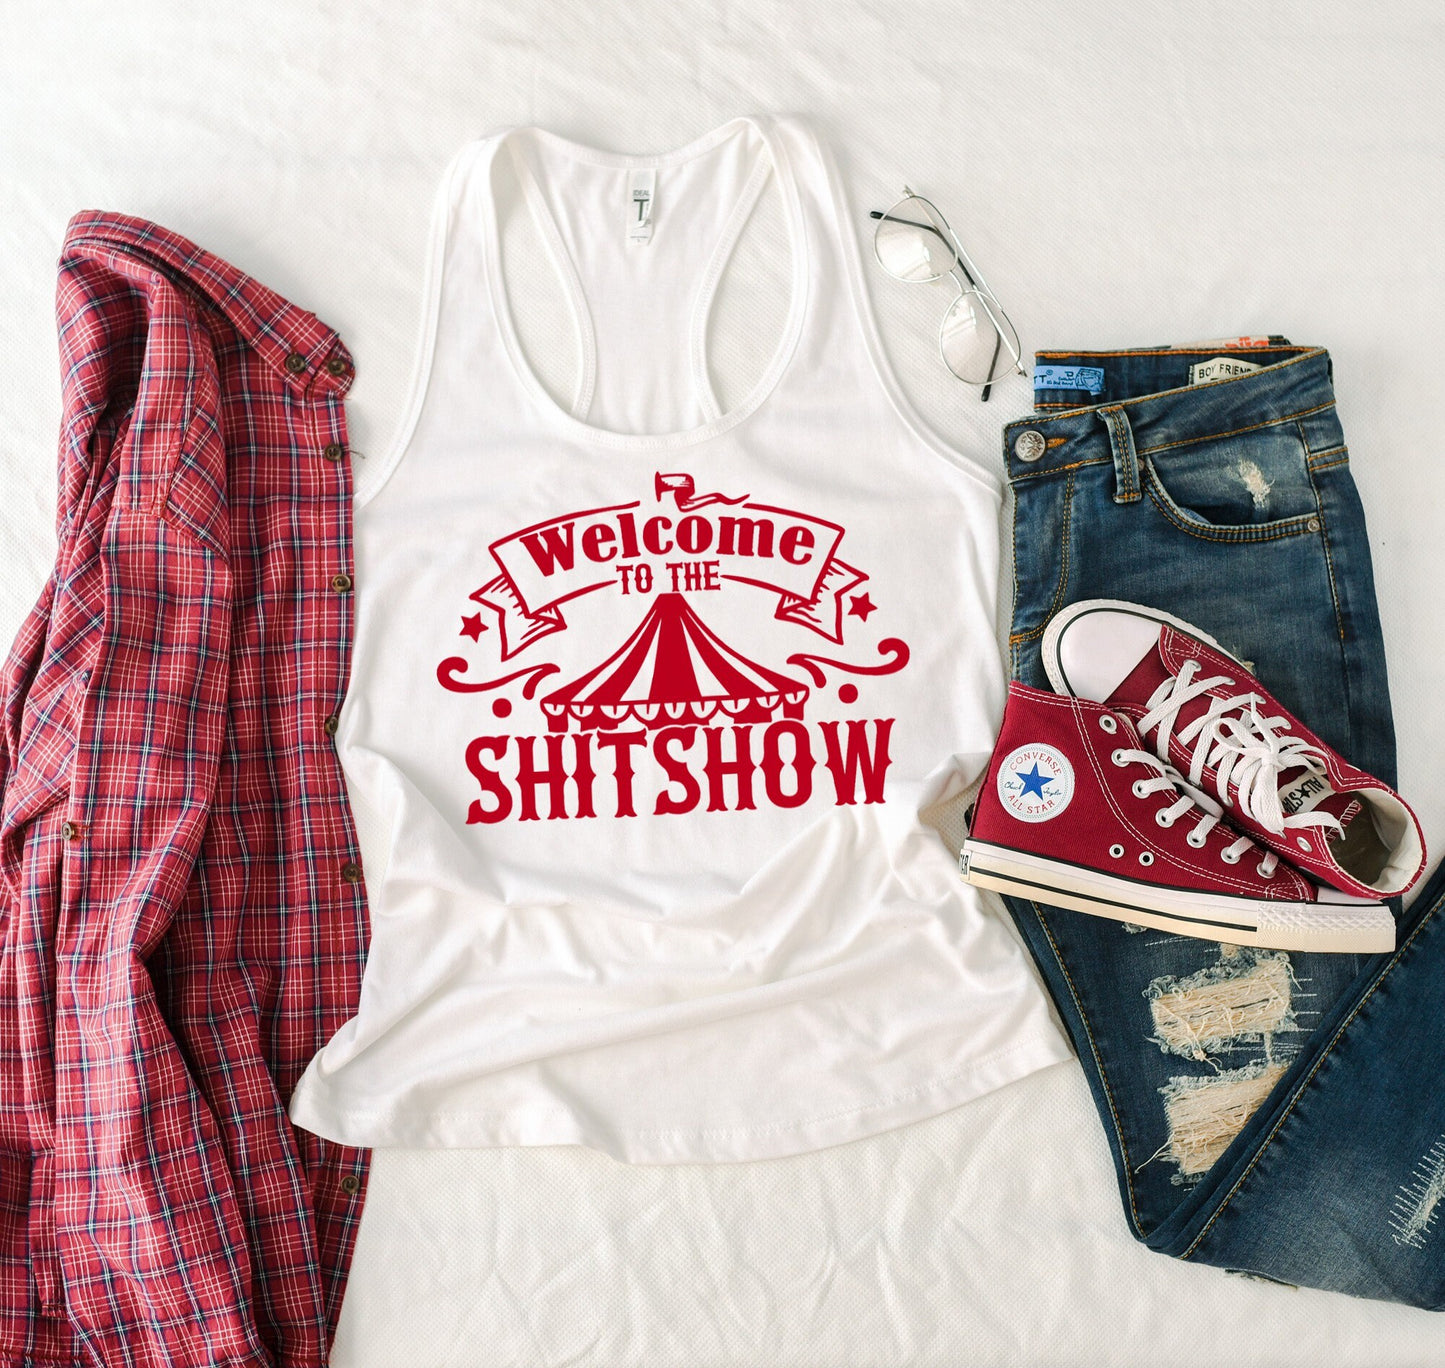 Welcome to the Shitshow Womens racerback tank t-shirt - mom life tank top - mom tank top - funny workout tank - mom shirt - mom of multiples